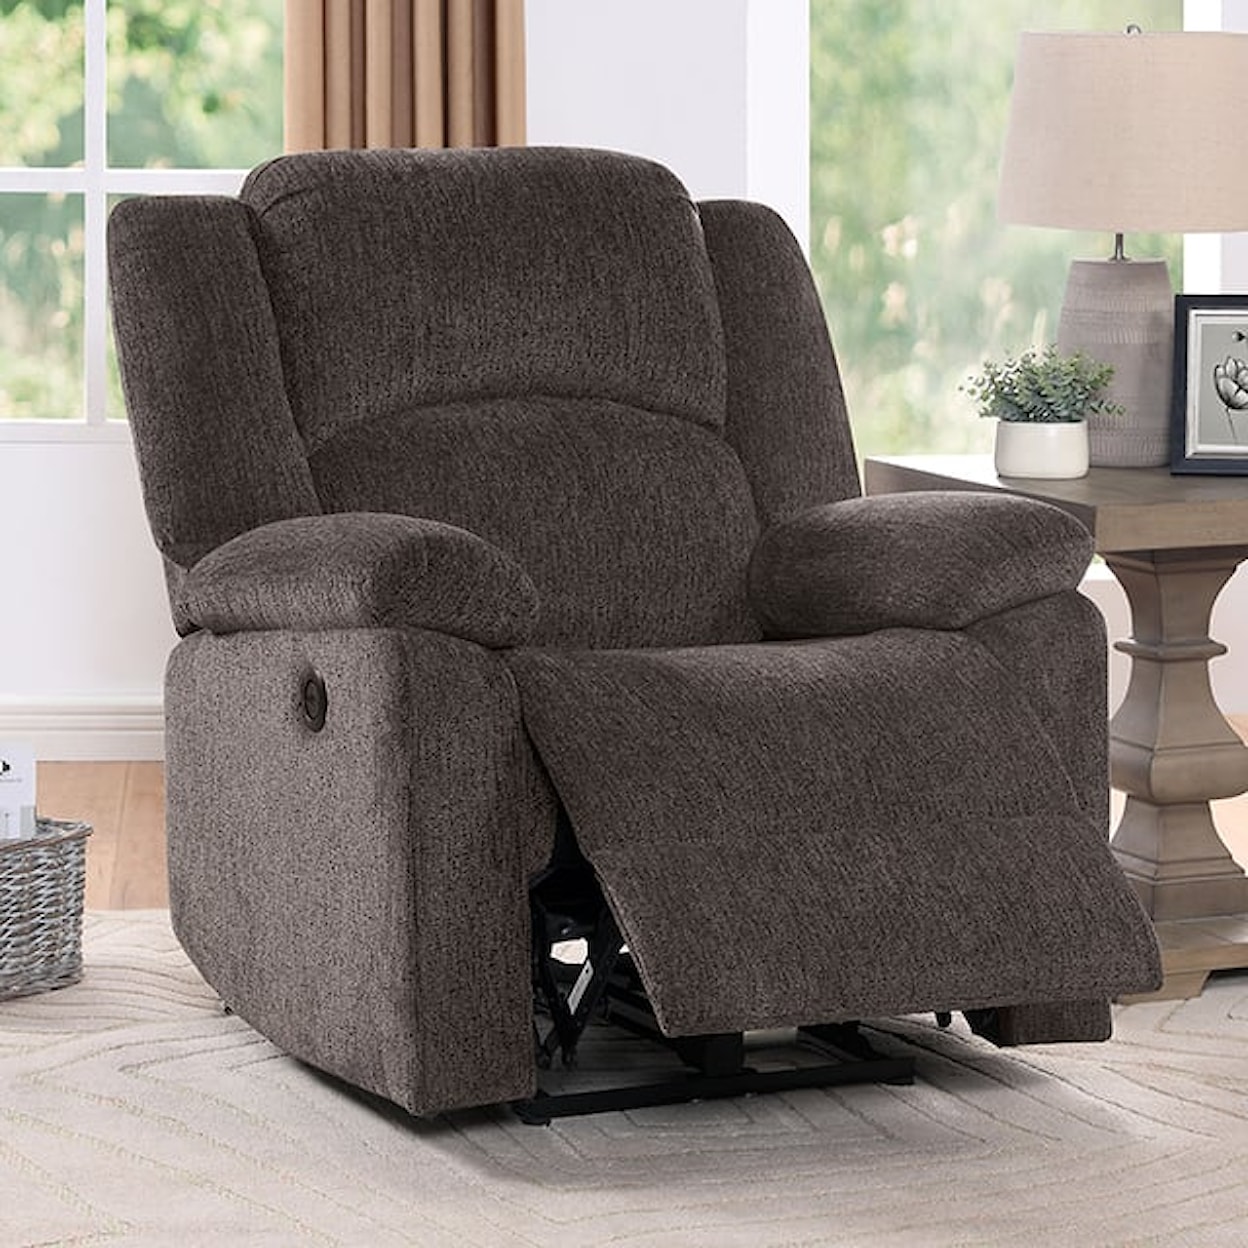 Furniture of America Charon Power Recliner